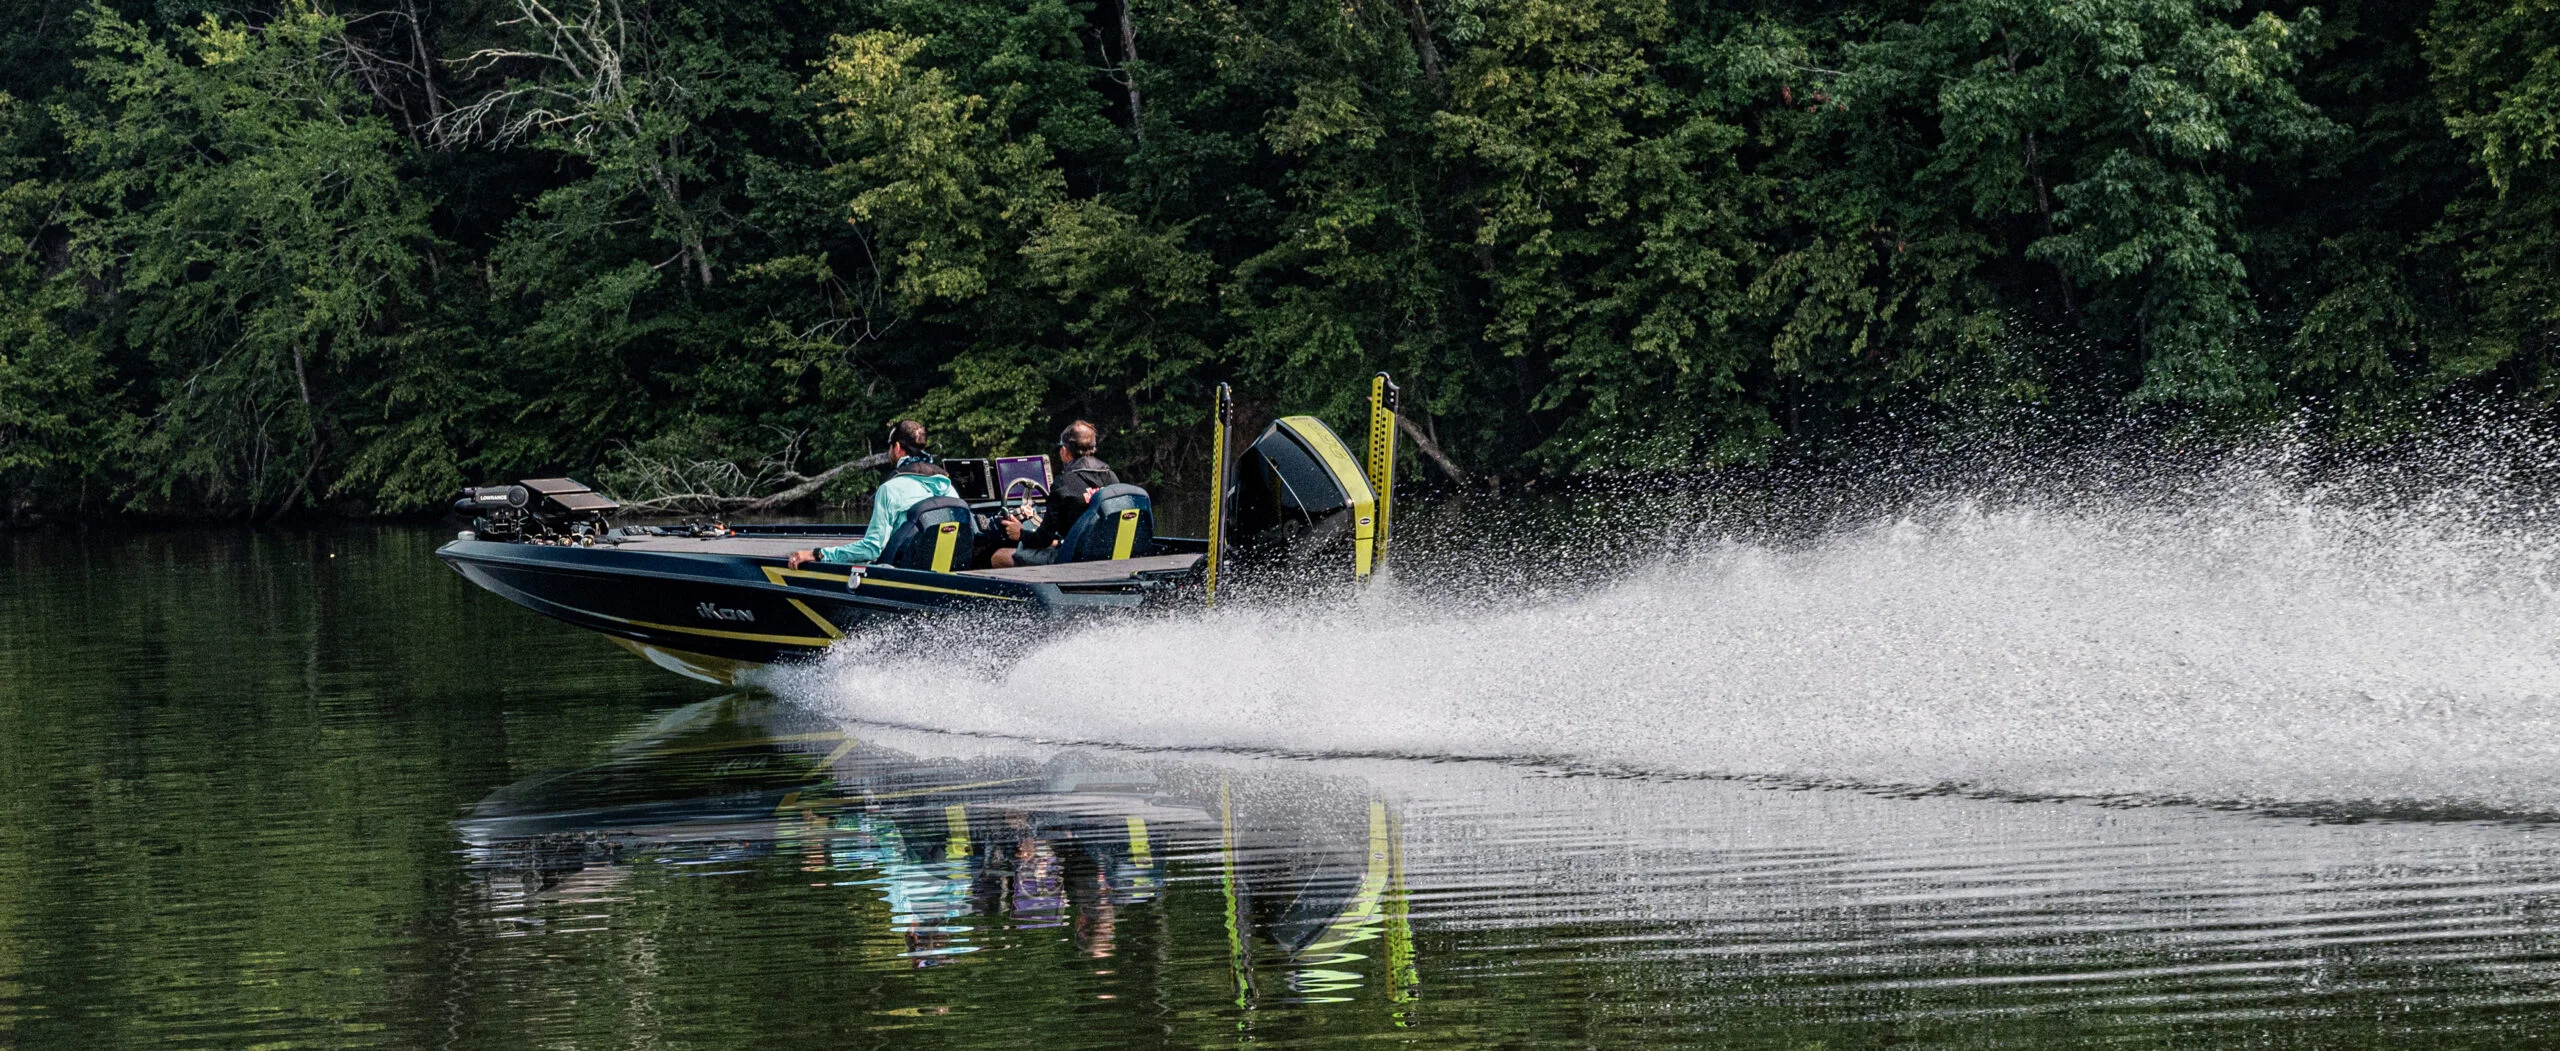 LX20 Bass Boat Going Fast On Plane